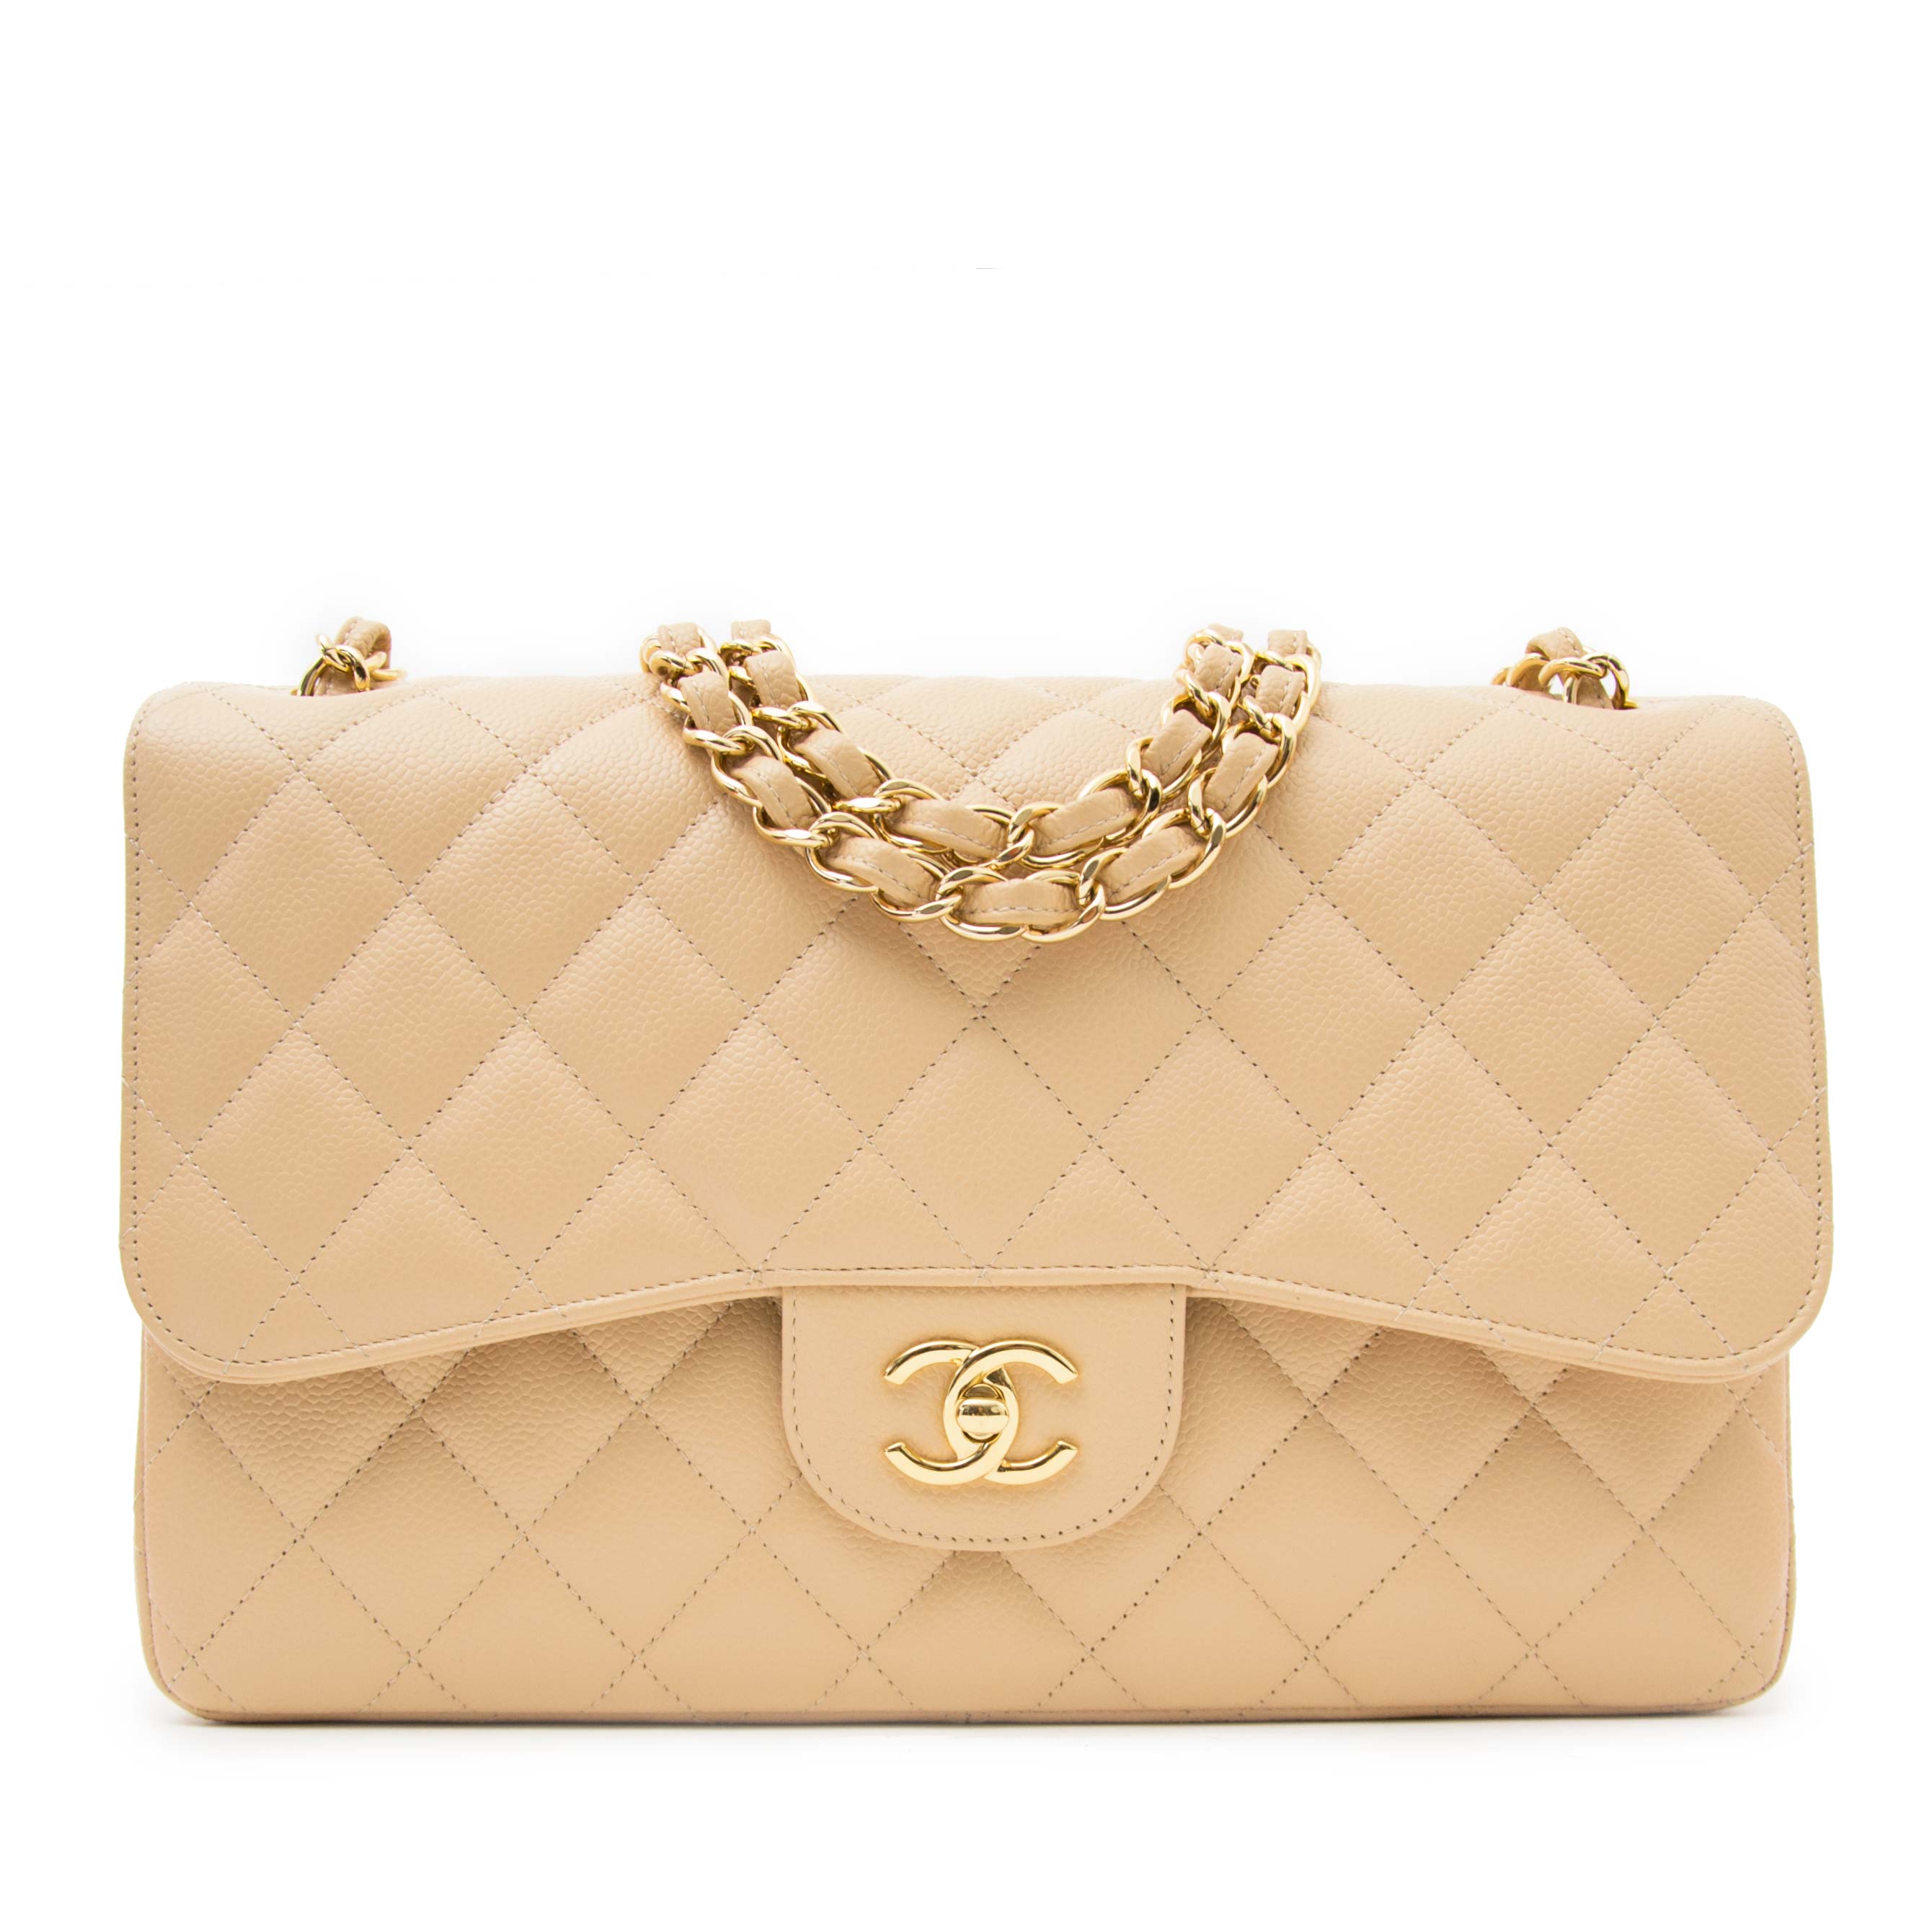 Votre Luxe - Chanel Nude Jumbo Classic Flap Bag ($8550)​​​​​​​​ ​​​​​​​​  This elegant Chanel jumbo bag is in nude caviar leather with gold-tone  metal hardware. In excellent 